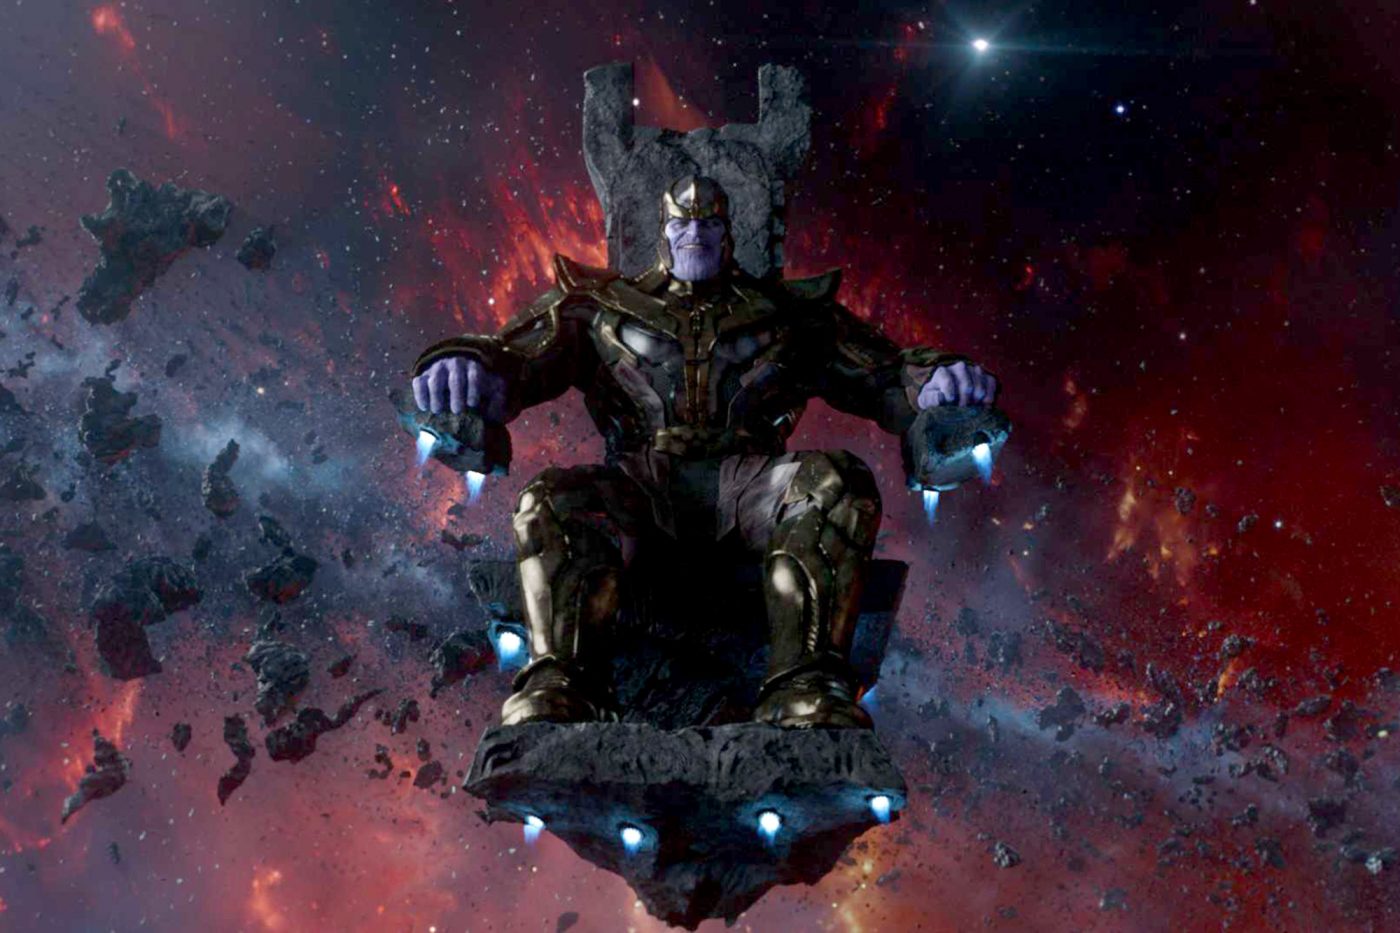 'This is his movie,' says 'Avengers: Infinity War' director about Thanos